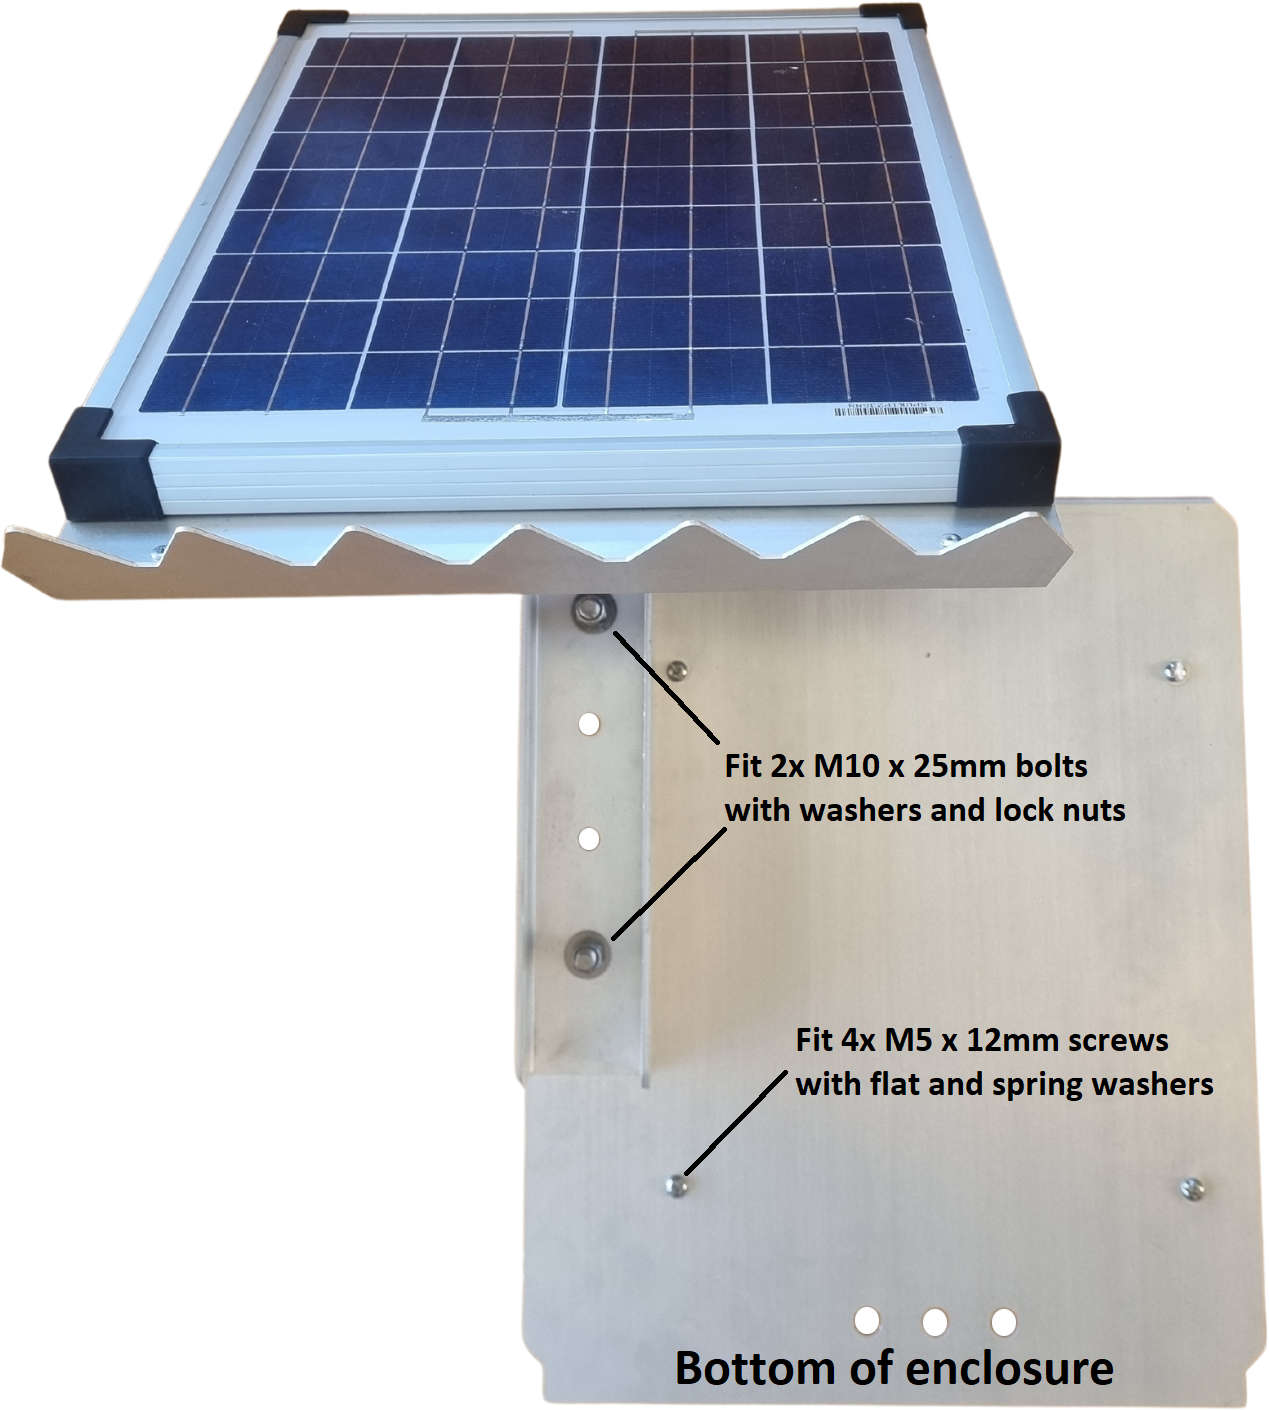 Mount the solar panel to the back plate.